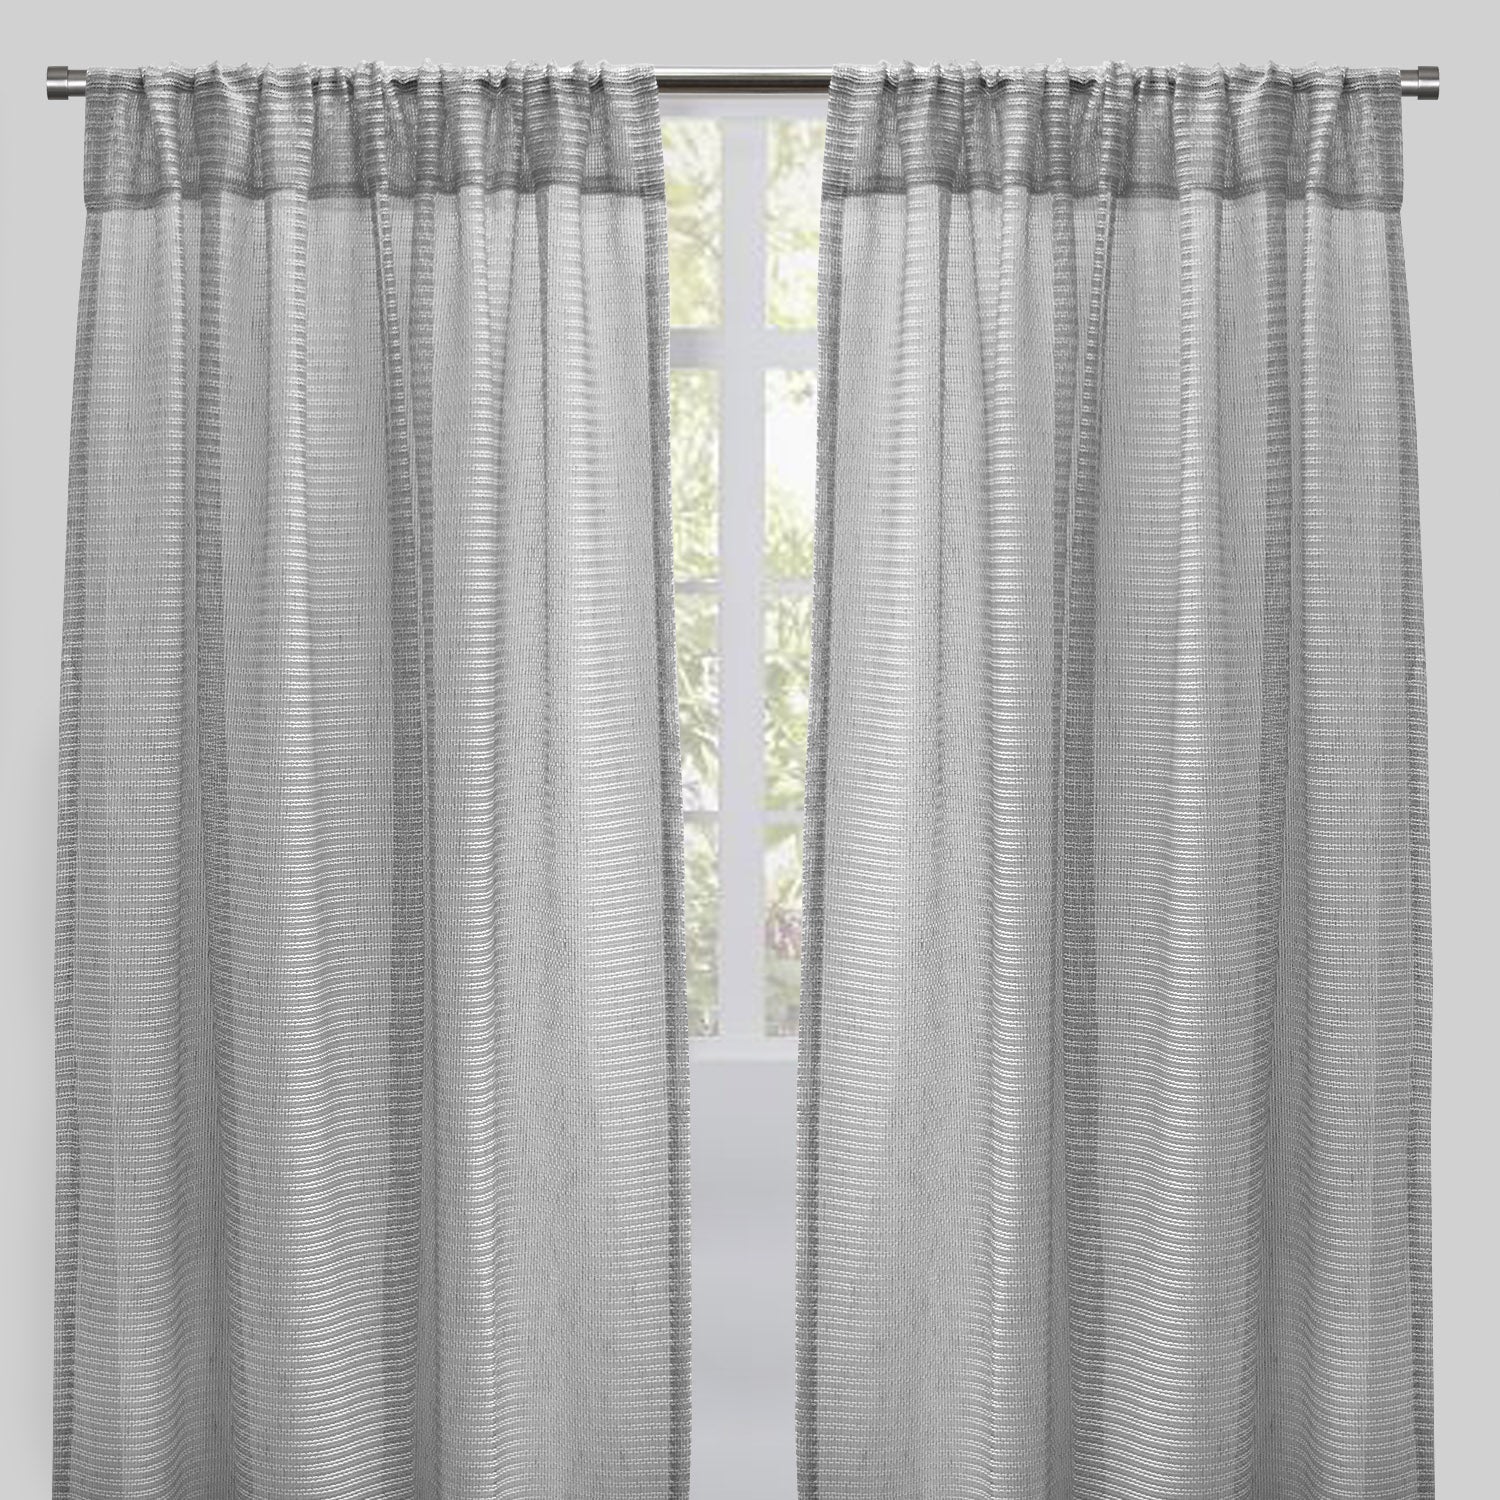 Ruby Curtain Panels | Striped Sheer